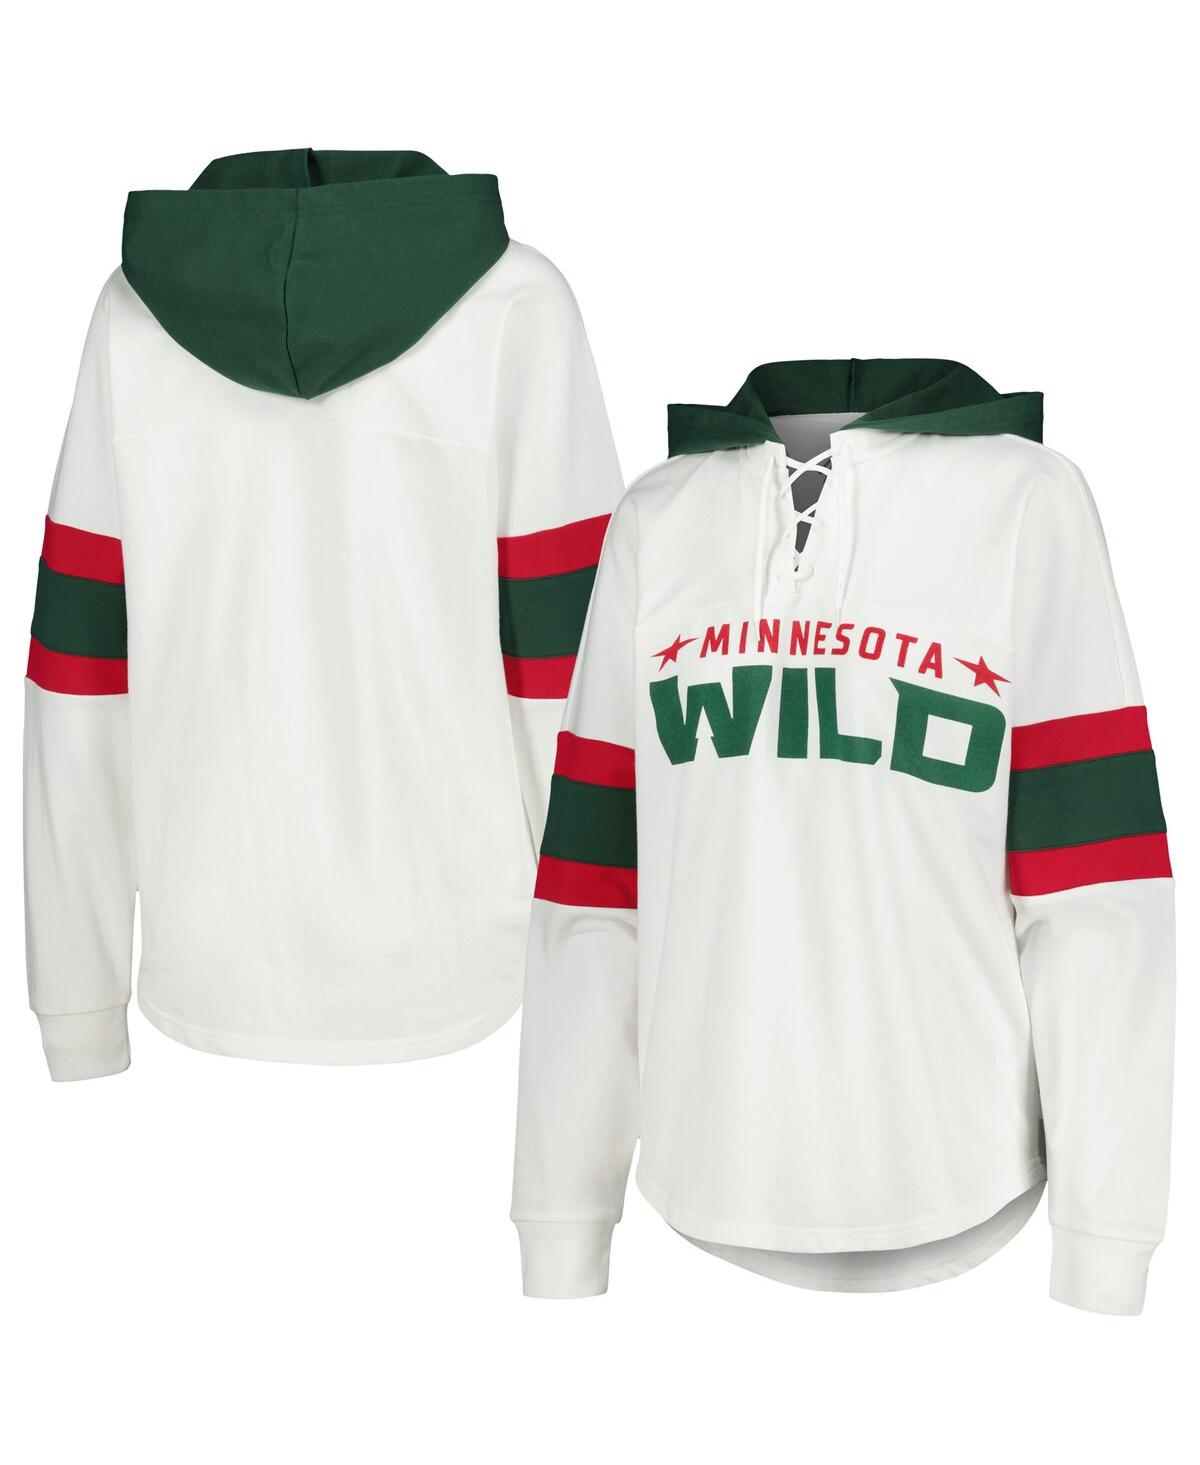 Women's G-iii 4Her by Carl Banks White, Green Minnesota Wild Goal Zone Long Sleeve Lace-Up Hoodie T-shirt - White, Green